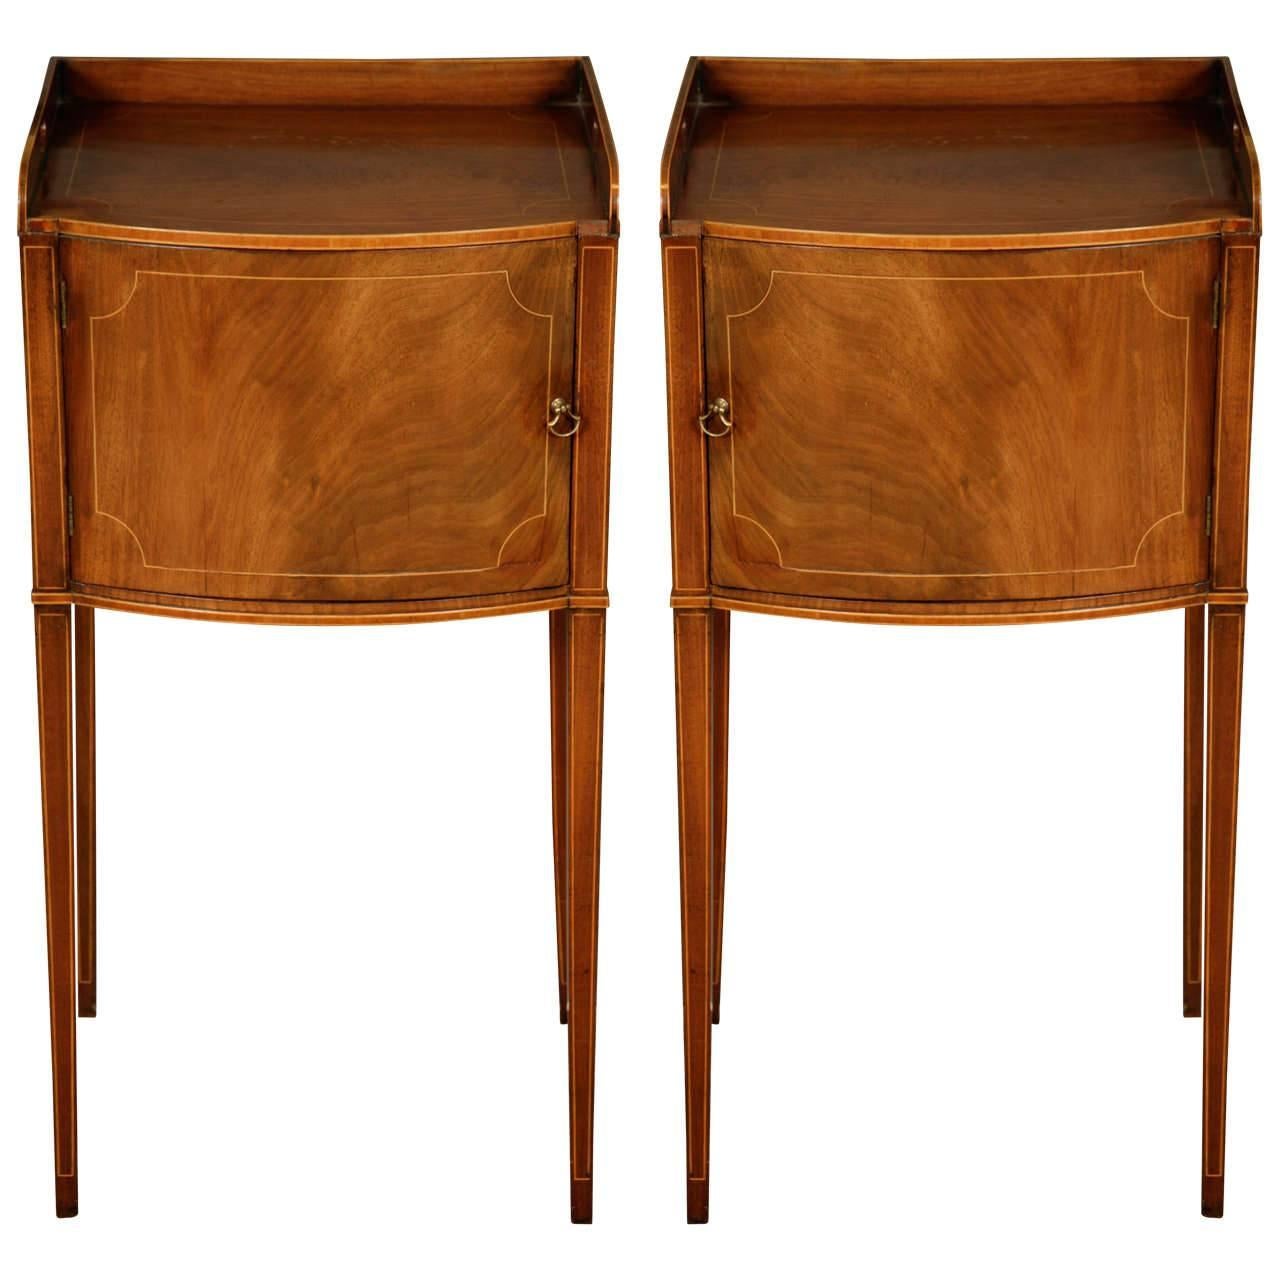 Pair of George III Mahogany and Box Wood Strung Bedside Cabinets